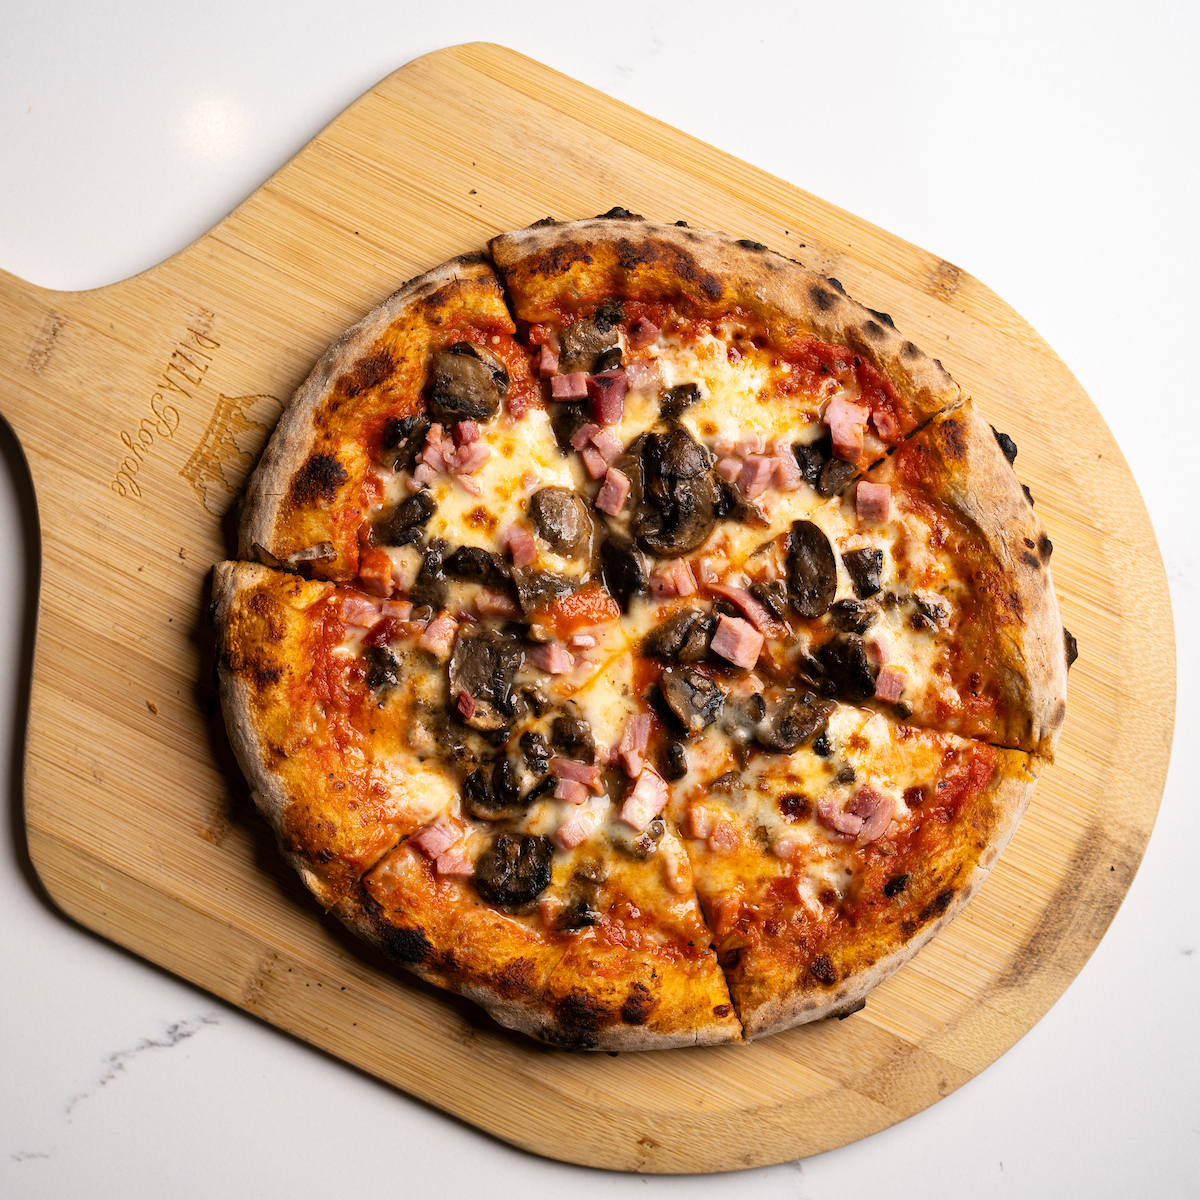 Oven-fired, hand-tossed pizza with Marksbury Farm ham and cremini mushrooms, made with carefully sourced, quality ingredients